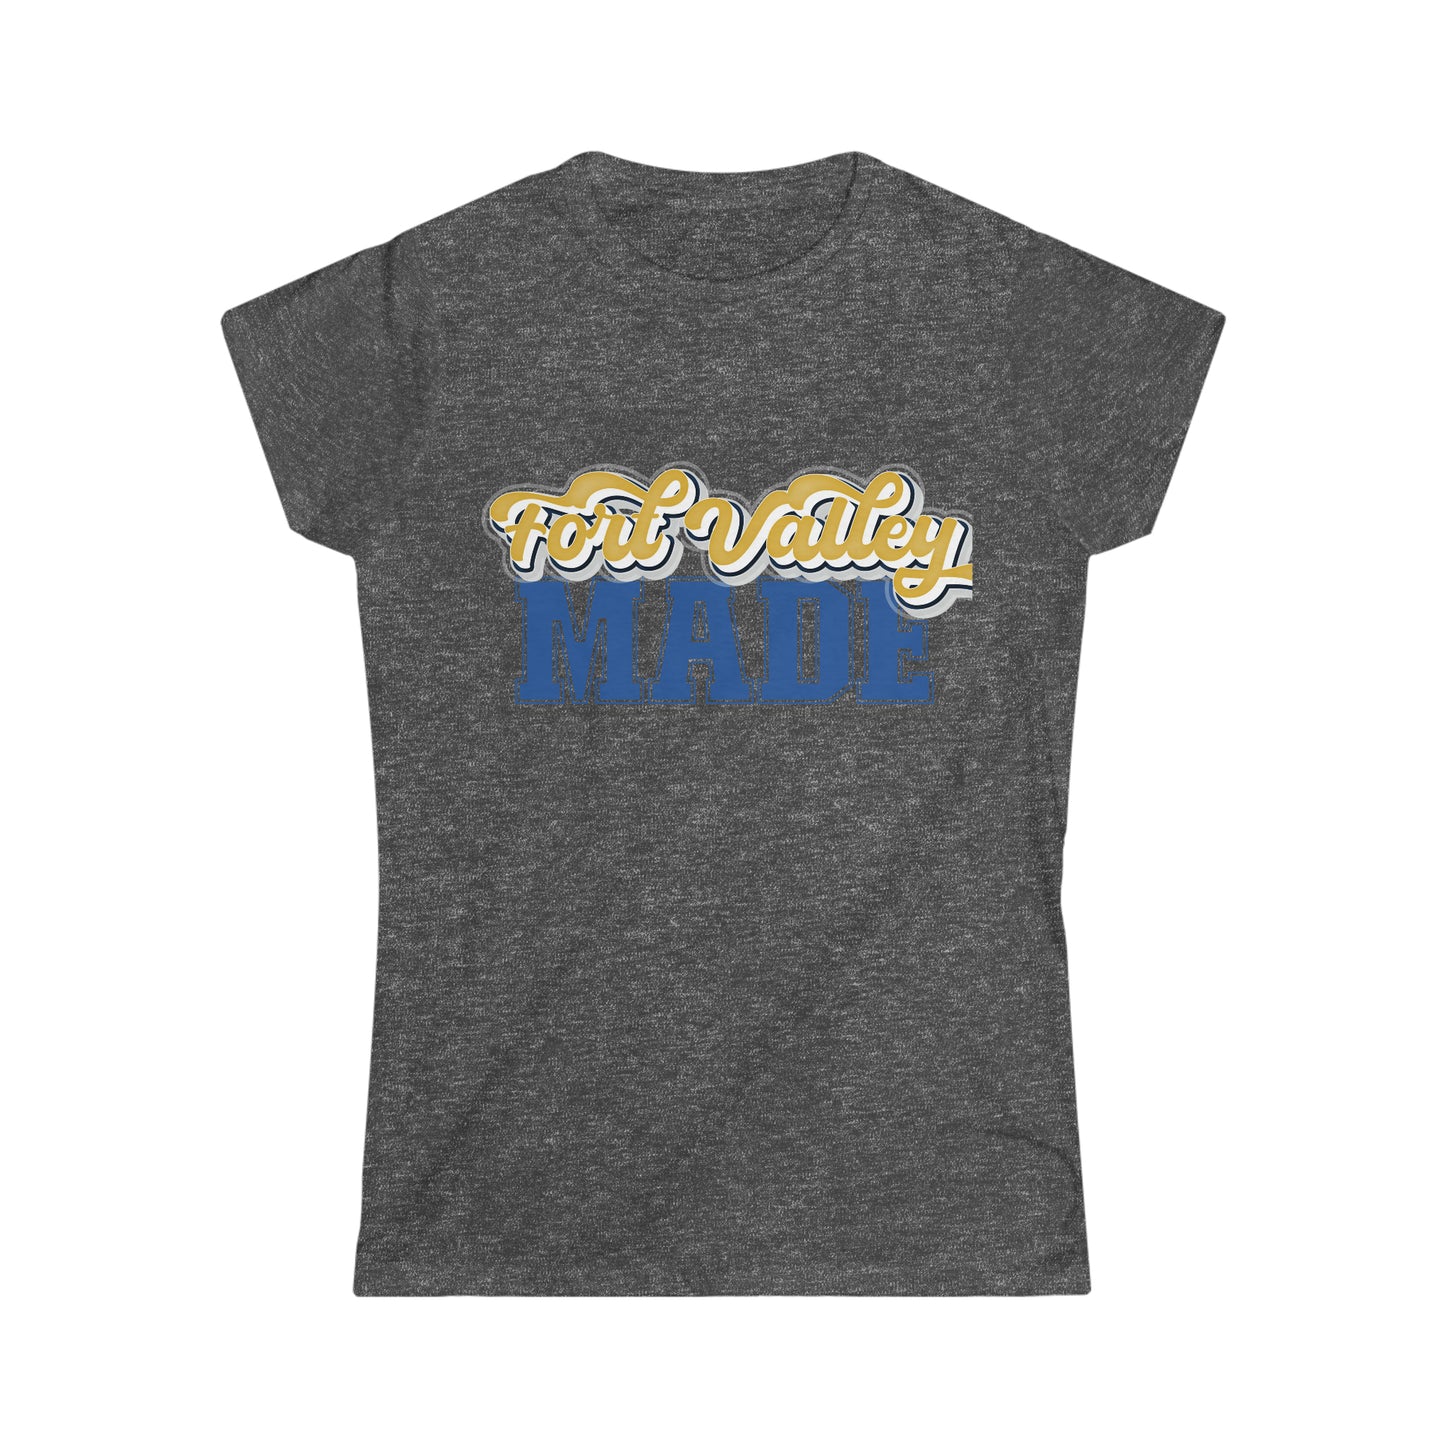 HBCU Love (Fort Valley State University Made/ Women's Softstyle Tee)